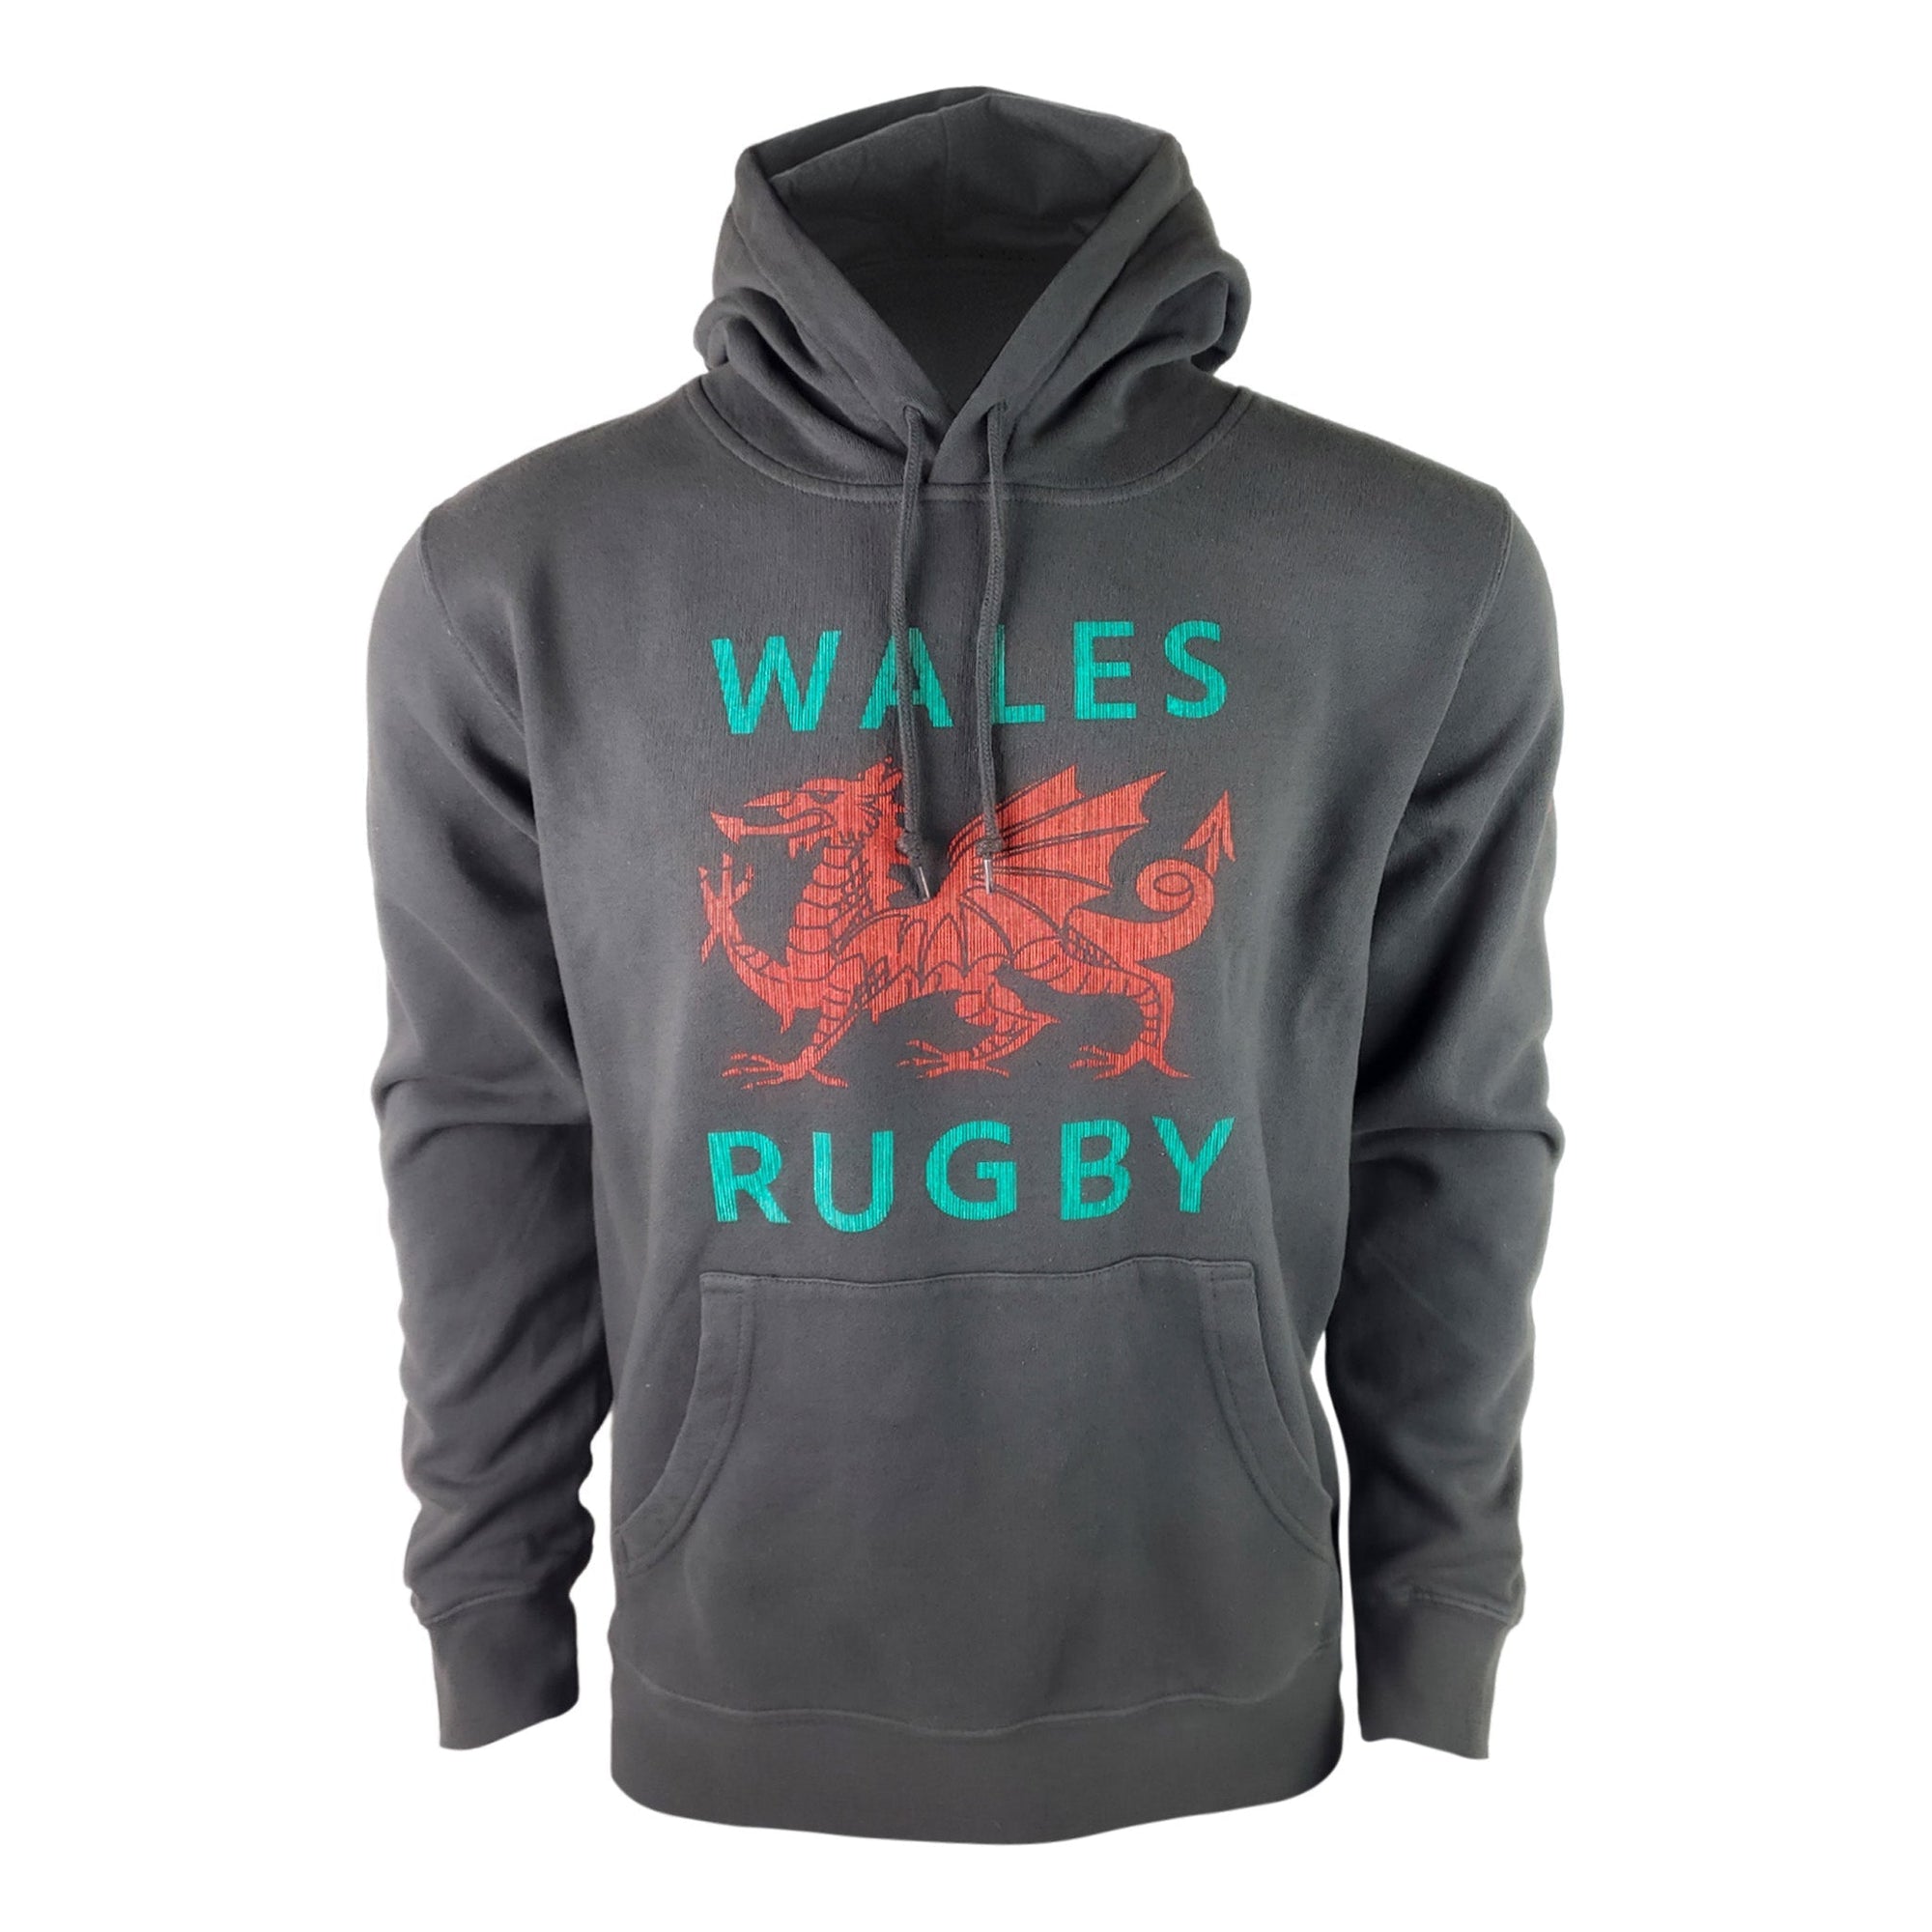 Rugby Imports Wales Rugby Midweight Hoodie